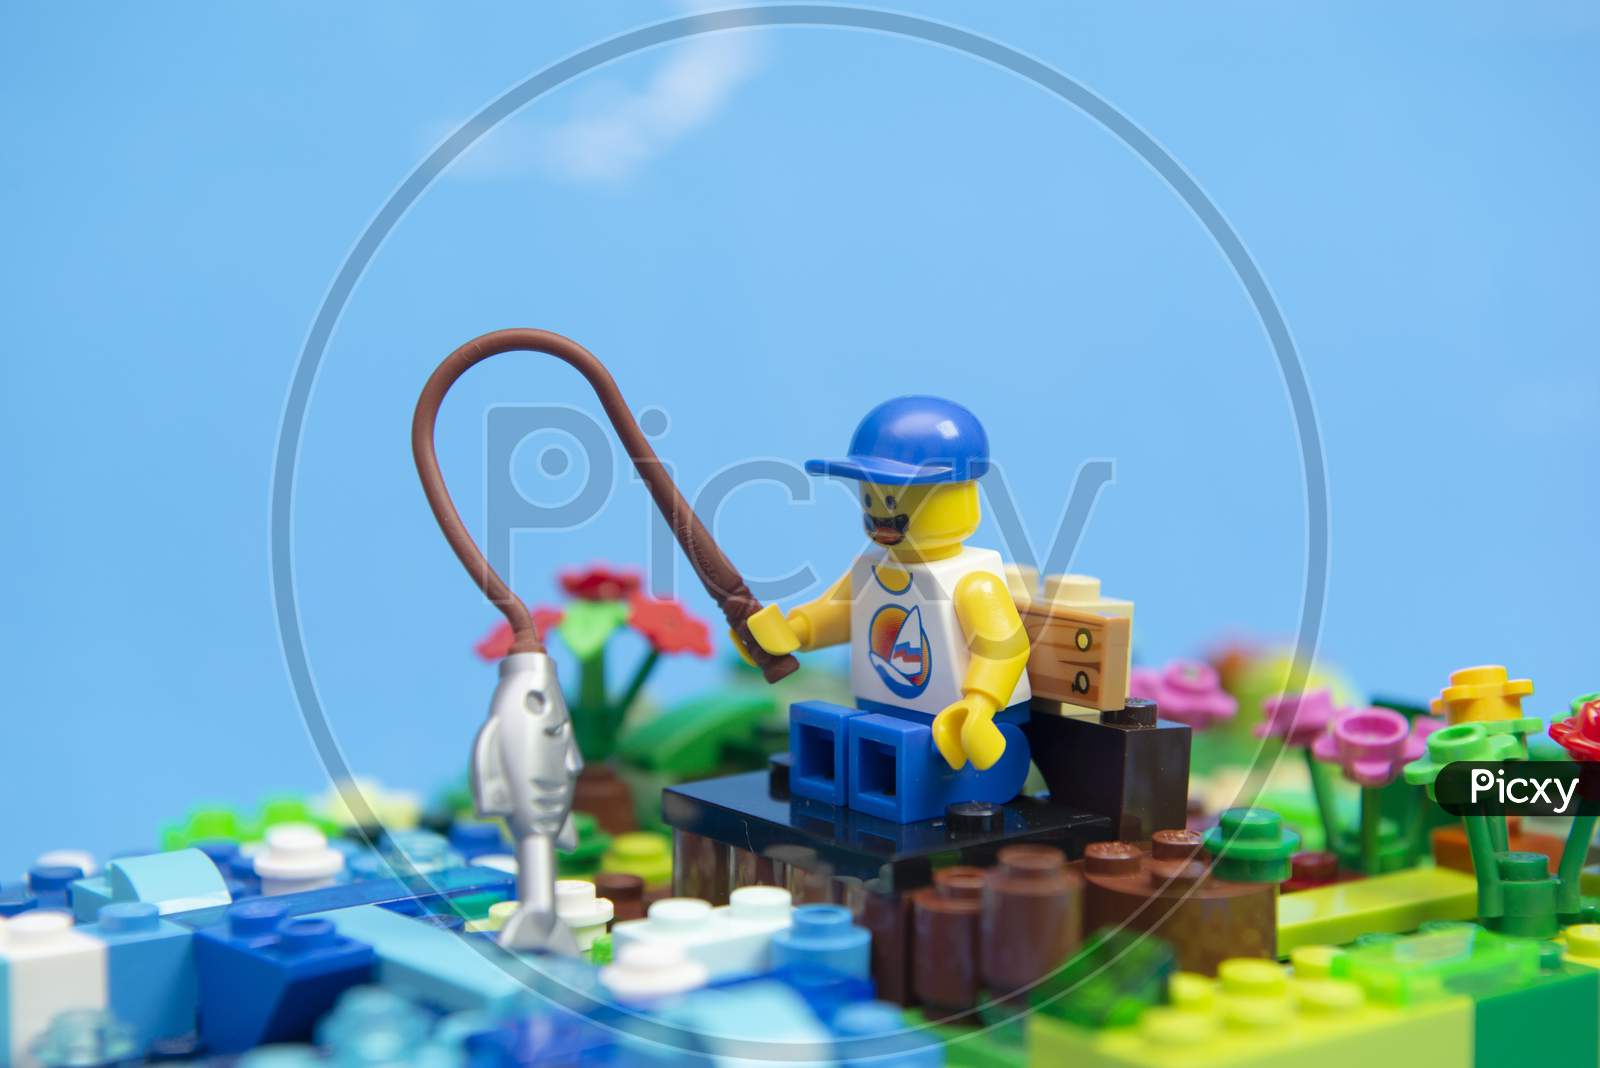 Florianopolis, Brazil. September 20, 2020: Happy Man Minifigure In Tank Top And Cap Sitting On A Wooden Bench Fishing For A Fish. Fishing Is A Sport Practiced Worldwide And By People Of All Ages.